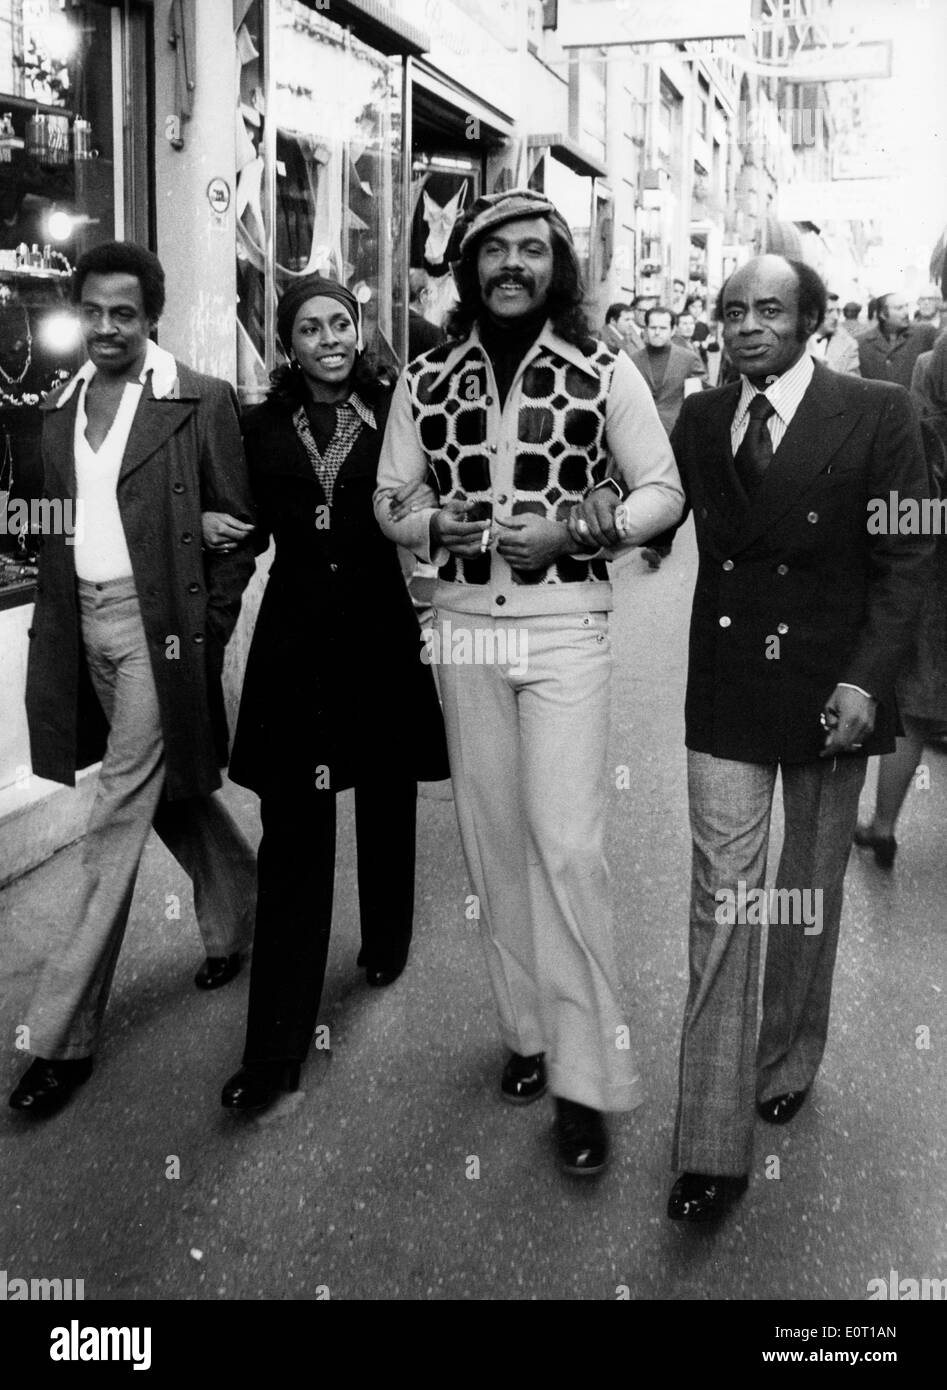 SHEILA FRAZIER with actors (R-L) Robert Guillaume, Ron O'Neal and Stock Photo